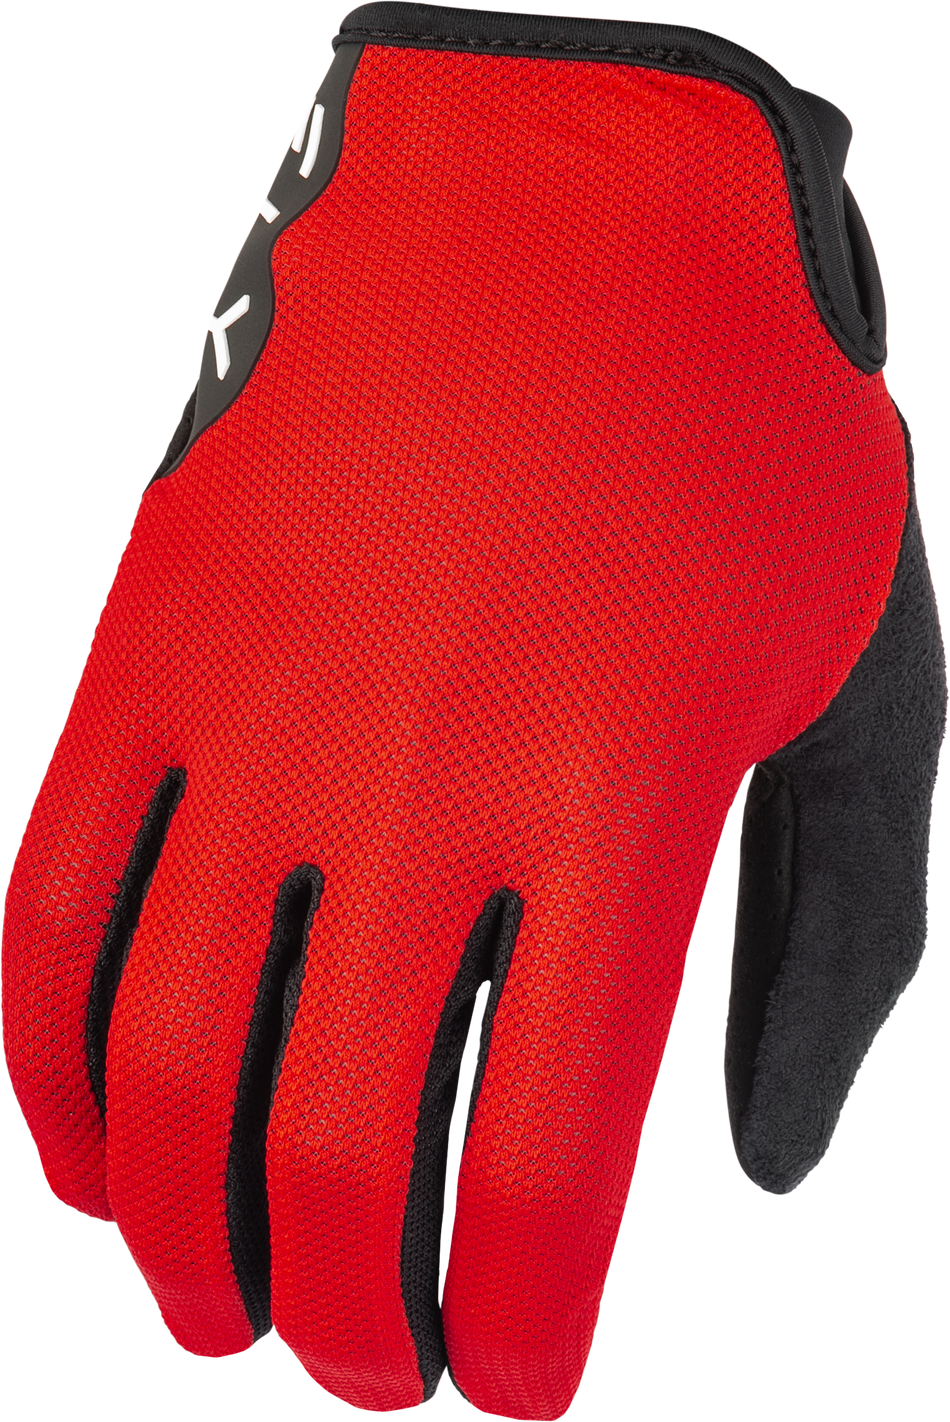 FLY RACING Mesh Gloves Red 2x 375-3372X